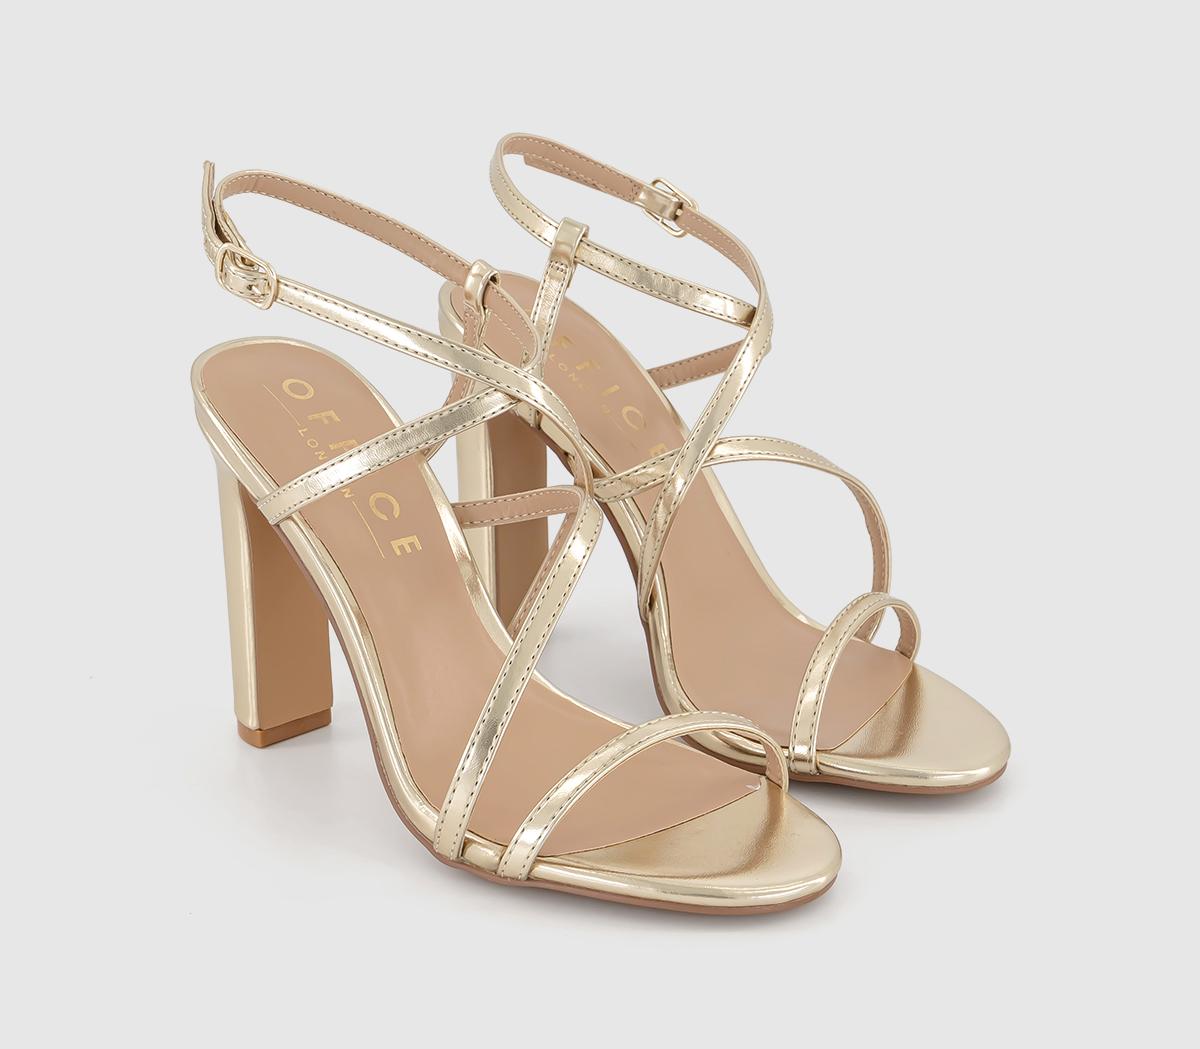 OFFICE Womens Harlequin Strappy Block Heels Gold, 7